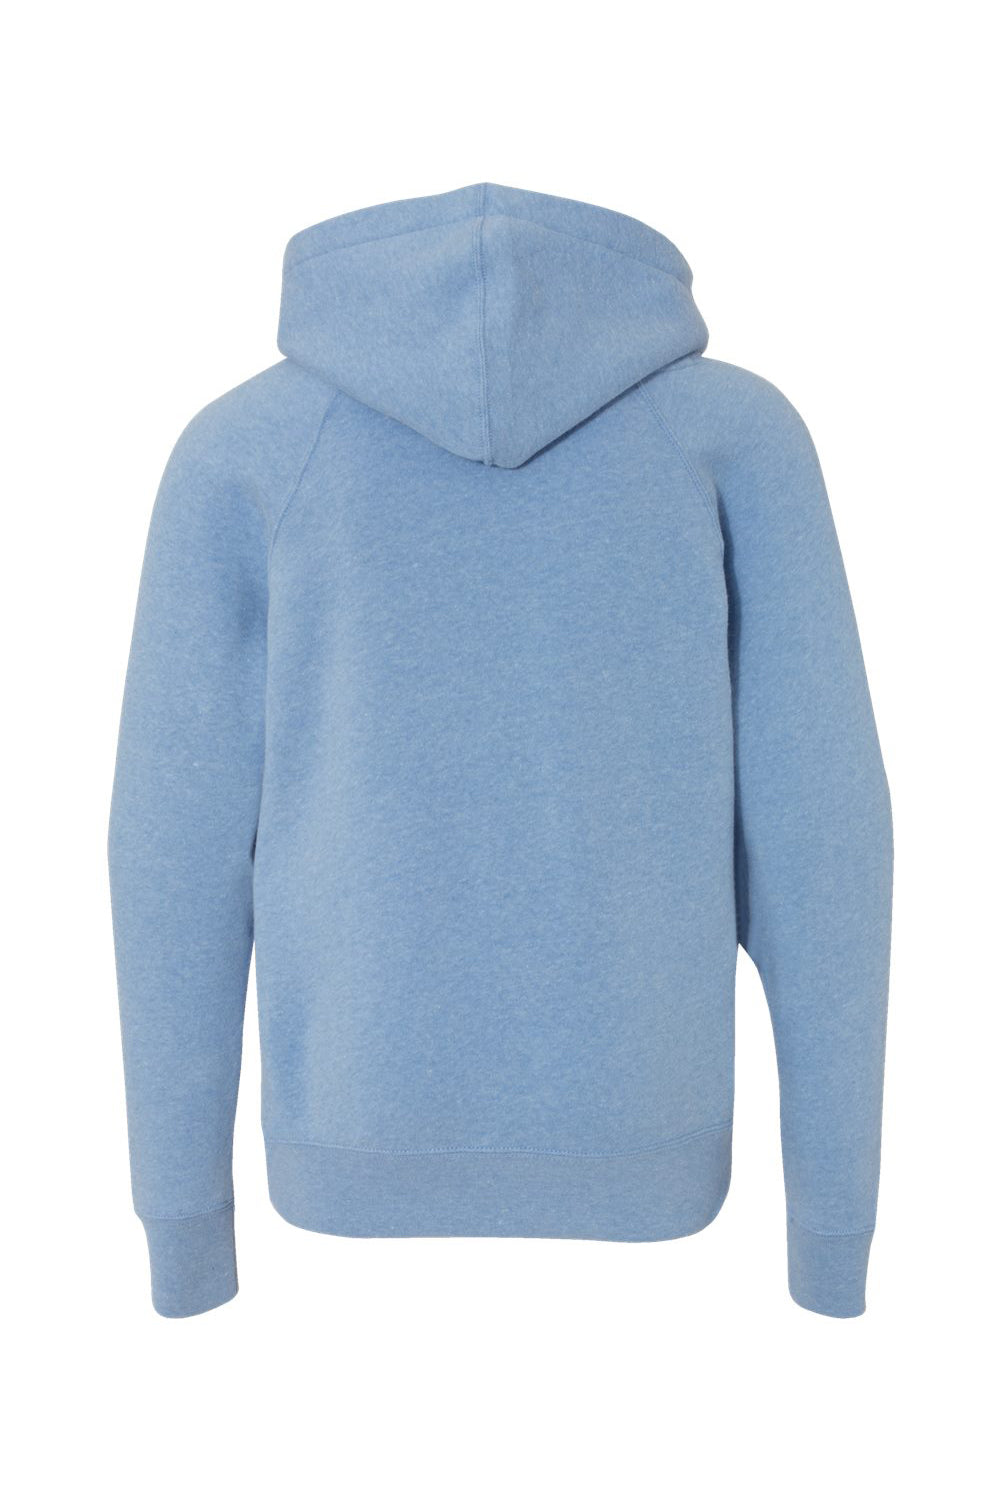 Independent Trading Co. PRM15YSB Youth Special Blend Raglan Hooded Sweatshirt Hoodie Pacific Blue Flat Back